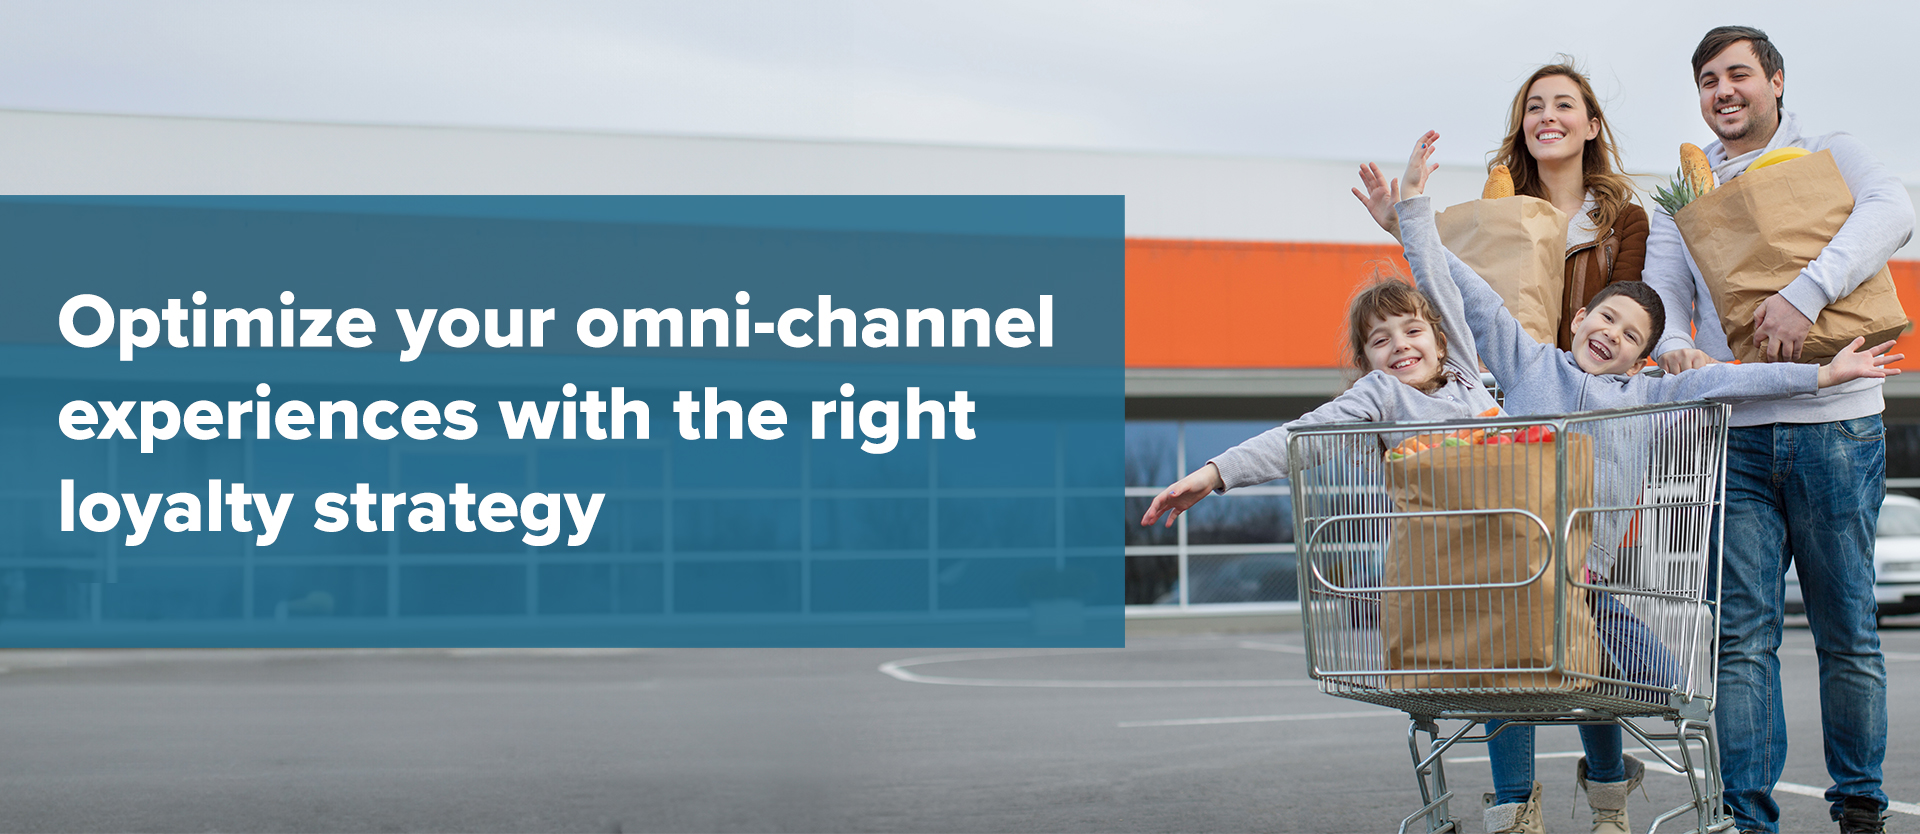 Optimize your omni-channel experiences with the right loyalty strategy